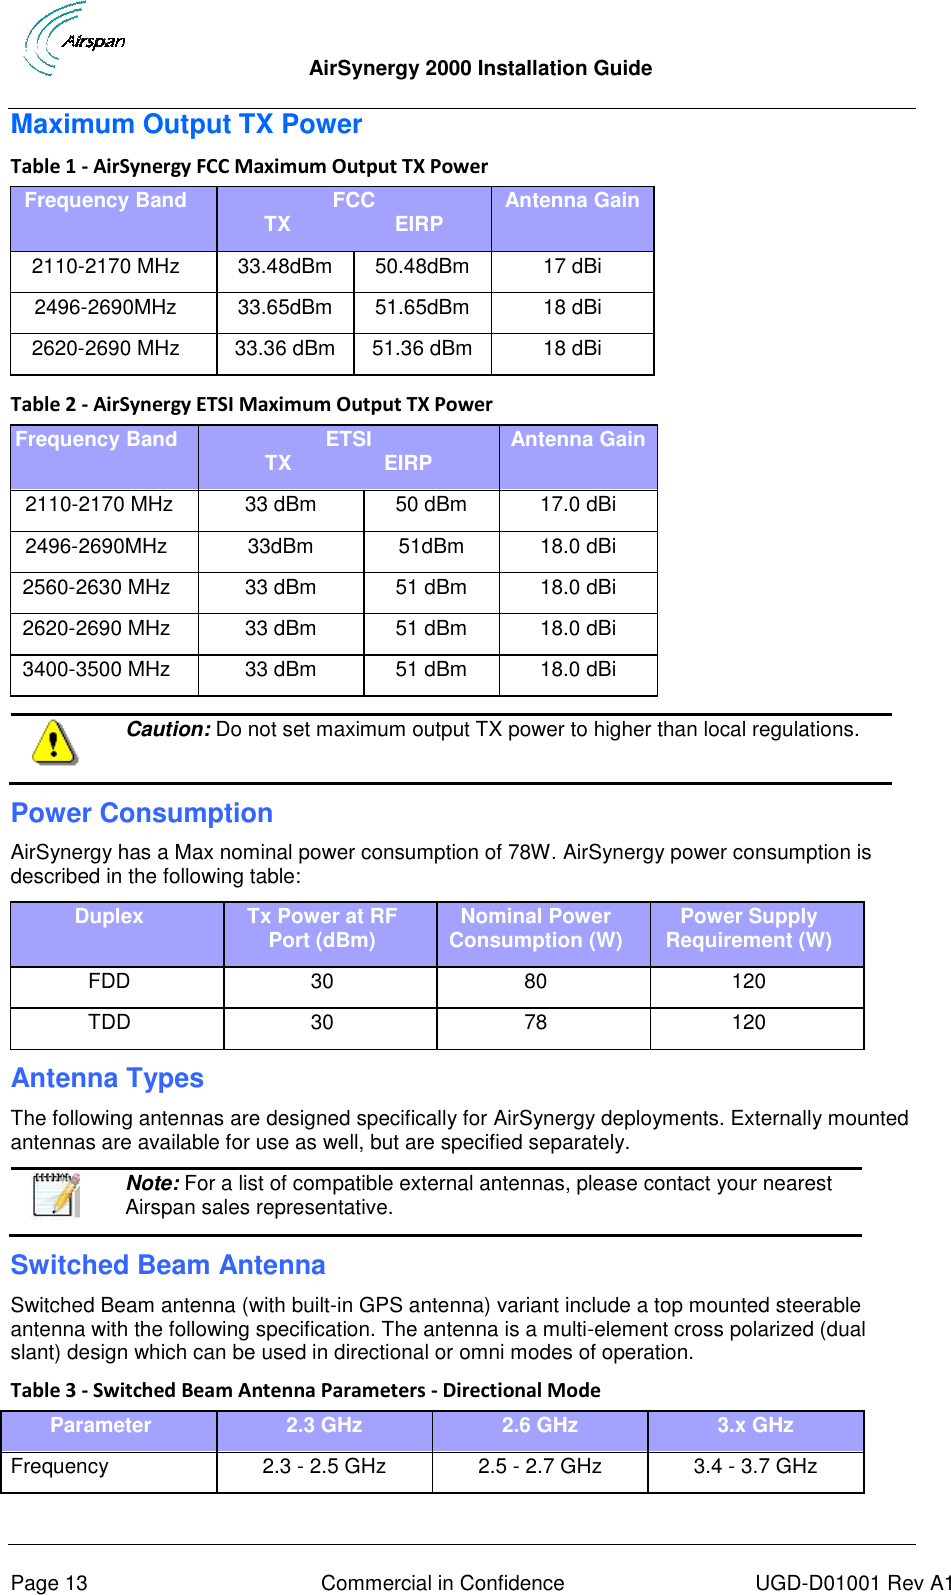  AirSynergy 2000 Installation Guide     Page 13  Commercial in Confidence  UGD-D01001 Rev A1 Maximum Output TX Power Table 1 - AirSynergy FCC Maximum Output TX Power Frequency Band FCC TX                  EIRP Antenna Gain 2110-2170 MHz 33.48dBm 50.48dBm 17 dBi 2496-2690MHz 33.65dBm 51.65dBm 18 dBi 2620-2690 MHz 33.36 dBm 51.36 dBm 18 dBi  Table 2 - AirSynergy ETSI Maximum Output TX Power Frequency Band ETSI TX                EIRP Antenna Gain  2110-2170 MHz 33 dBm 50 dBm 17.0 dBi 2496-2690MHz 33dBm 51dBm 18.0 dBi 2560-2630 MHz 33 dBm 51 dBm 18.0 dBi 2620-2690 MHz 33 dBm 51 dBm 18.0 dBi 3400-3500 MHz 33 dBm 51 dBm 18.0 dBi   Caution: Do not set maximum output TX power to higher than local regulations. Power Consumption AirSynergy has a Max nominal power consumption of 78W. AirSynergy power consumption is described in the following table: Duplex Tx Power at RF Port (dBm) Nominal Power Consumption (W) Power Supply Requirement (W) FDD 30 80 120 TDD 30 78 120 Antenna Types The following antennas are designed specifically for AirSynergy deployments. Externally mounted antennas are available for use as well, but are specified separately.  Note: For a list of compatible external antennas, please contact your nearest Airspan sales representative. Switched Beam Antenna Switched Beam antenna (with built-in GPS antenna) variant include a top mounted steerable antenna with the following specification. The antenna is a multi-element cross polarized (dual slant) design which can be used in directional or omni modes of operation. Table 3 - Switched Beam Antenna Parameters - Directional Mode Parameter 2.3 GHz 2.6 GHz 3.x GHz Frequency 2.3 - 2.5 GHz 2.5 - 2.7 GHz 3.4 - 3.7 GHz 